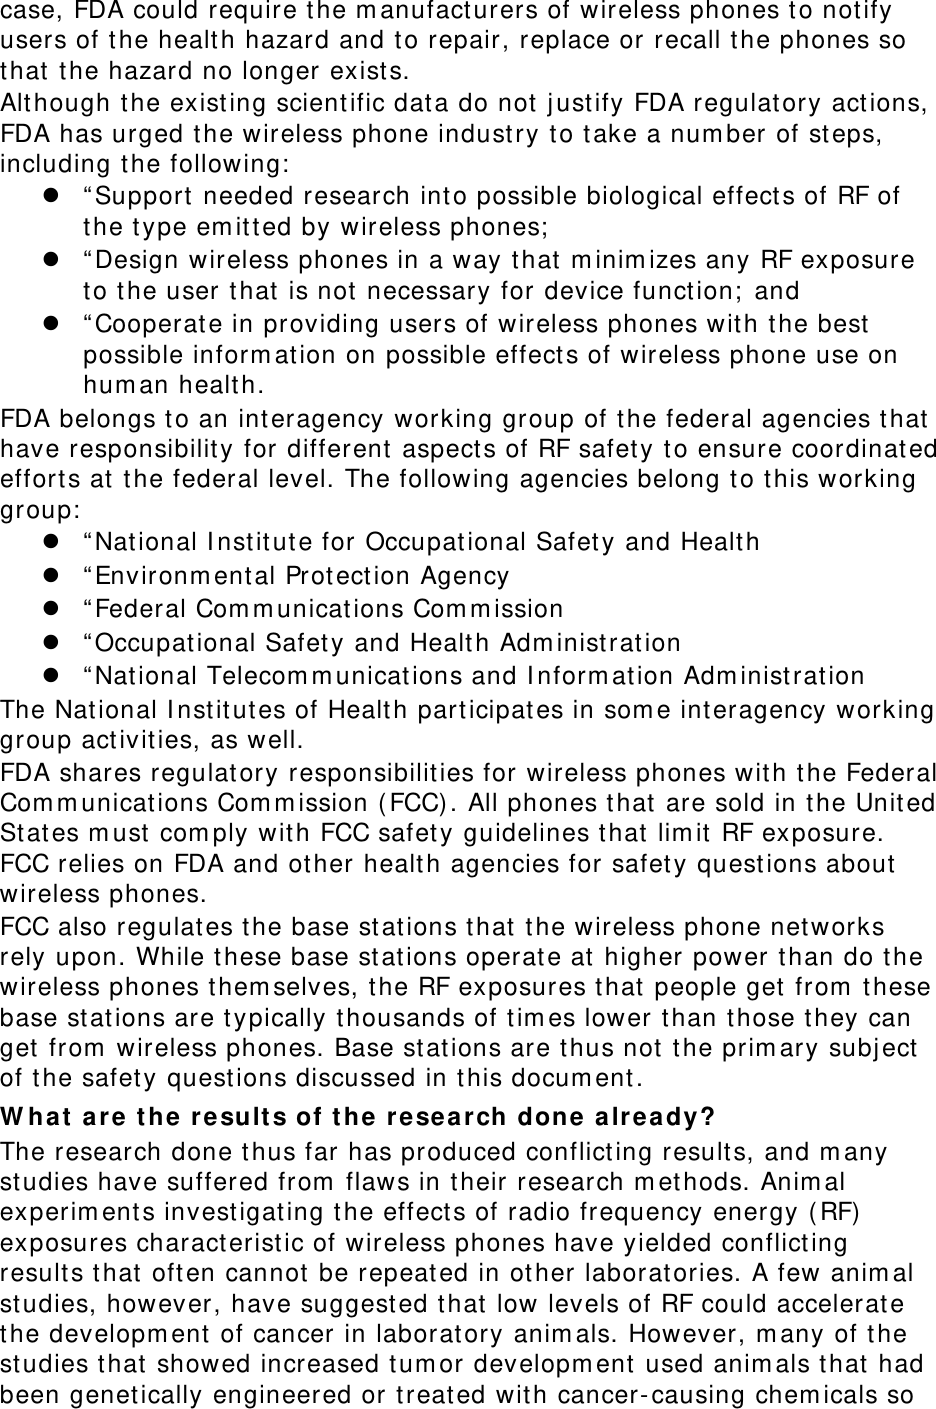 case, FDA could require t he m anufacturers of wireless phones t o notify users of the healt h hazard and t o repair, replace or recall t he phones so that  the hazard no longer exists. Although t he exist ing scientific dat a do not  j ust ify FDA regulat ory act ions, FDA has urged the wireless phone indust ry to t ake a num ber of st eps, including t he following:   “ Support needed research int o possible biological effect s of RF of the t ype em itt ed by wireless phones;   “ Design wireless phones in a way t hat  m inim izes any RF exposure to t he user t hat is not  necessary for device funct ion;  and  “ Cooperat e in providing users of wireless phones with the best possible inform at ion on possible effect s of wireless phone use on hum an healt h. FDA belongs t o an int eragency working group of the federal agencies t hat  have responsibilit y for different aspects of RF safet y t o ensure coordinated effort s at  t he federal level. The following agencies belong to t his working group:   “ Nat ional I nstit ut e for Occupat ional Safety and Healt h  “ Environm ental Protect ion Agency  “ Federal Com m unications Com m ission  “ Occupational Safet y and Healt h Adm inistrat ion  “ Nat ional Telecom m unications and I nform at ion Adm inist ration The Nat ional I nstit utes of Health part icipat es in som e interagency working group act ivit ies, as well. FDA shares regulat ory responsibilit ies for wireless phones wit h the Federal Com m unicat ions Com m ission ( FCC) . All phones t hat are sold in t he United St at es m ust  com ply wit h FCC safet y guidelines t hat lim it  RF exposure. FCC relies on FDA and ot her healt h agencies for safet y quest ions about  wireless phones. FCC also regulat es t he base st at ions that  the wireless phone net works rely upon. While t hese base st at ions operate at  higher power t han do t he wireless phones t hem selves, t he RF exposures t hat people get  from  t hese base st at ions are t ypically t housands of tim es lower t han t hose they can get  from  wireless phones. Base stations are thus not  the prim ary subj ect of t he safet y quest ions discussed in t his docum ent. W ha t  a r e t he  result s of t he  research done a lrea dy? The research done t hus far has produced conflict ing result s, and m any studies have suffered from  flaws in their research m et hods. Anim al experim ent s invest igat ing t he effect s of radio frequency energy ( RF) exposures charact eristic of wireless phones have yielded conflict ing result s t hat often cannot  be repeat ed in other laborat ories. A few anim al studies, however, have suggest ed t hat  low levels of RF could accelerat e the developm ent of cancer in laborat ory anim als. However, m any of the studies t hat  showed increased t um or developm ent  used anim als t hat  had been genetically engineered or treated wit h cancer- causing chem icals so 